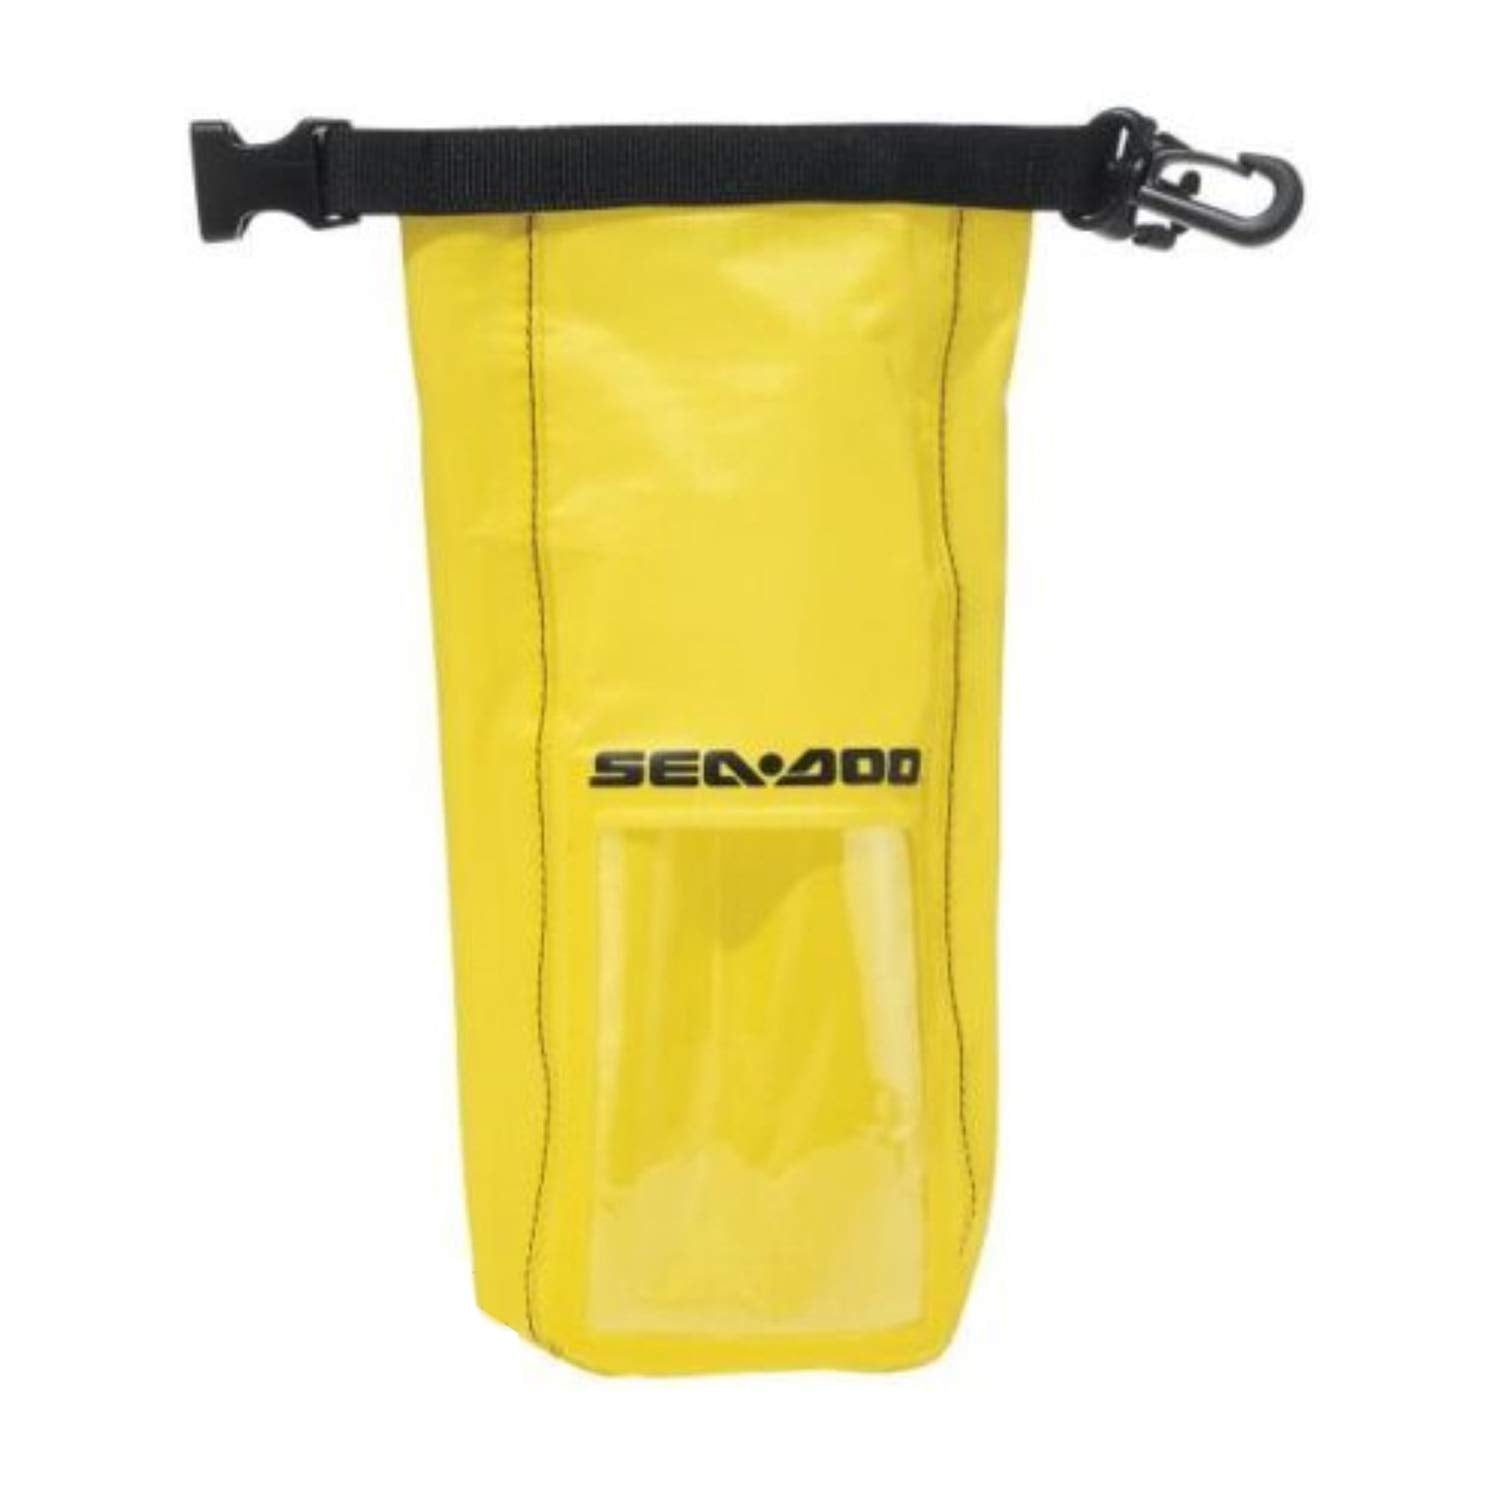 Sea-doo - 1-Litre Splash Proof Protection Yellow Dry Pouch